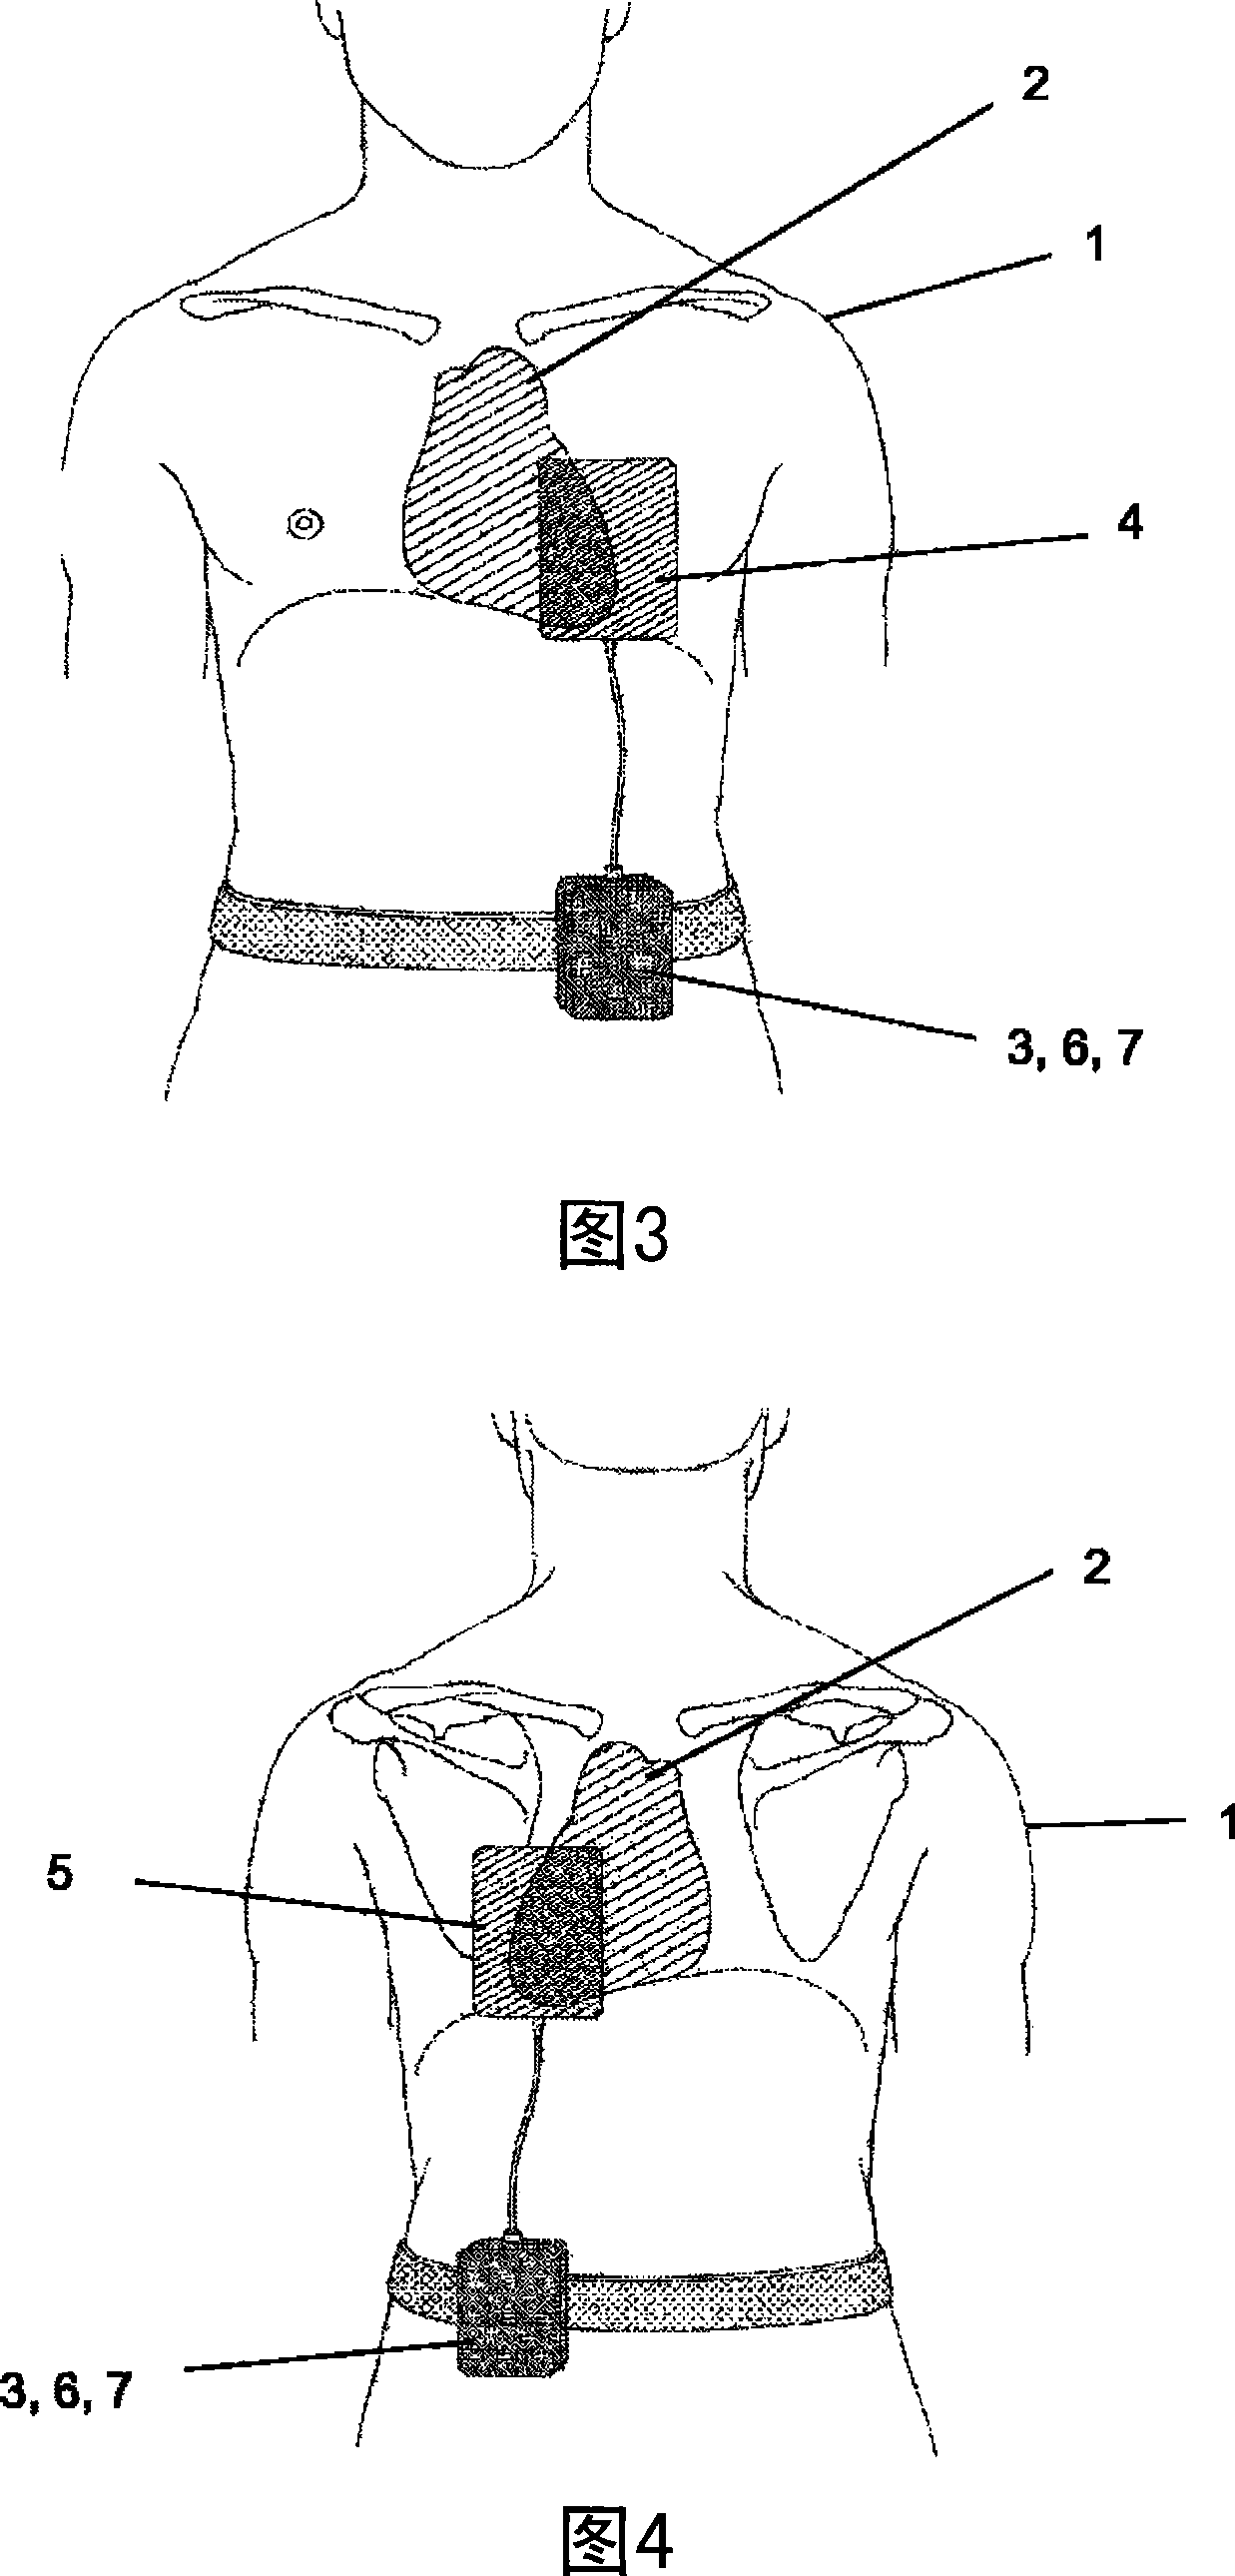 Electromedical implantable or extracorporeally applicable device for the treatment or monitoring of organs, and method for therapeutic organ treatment